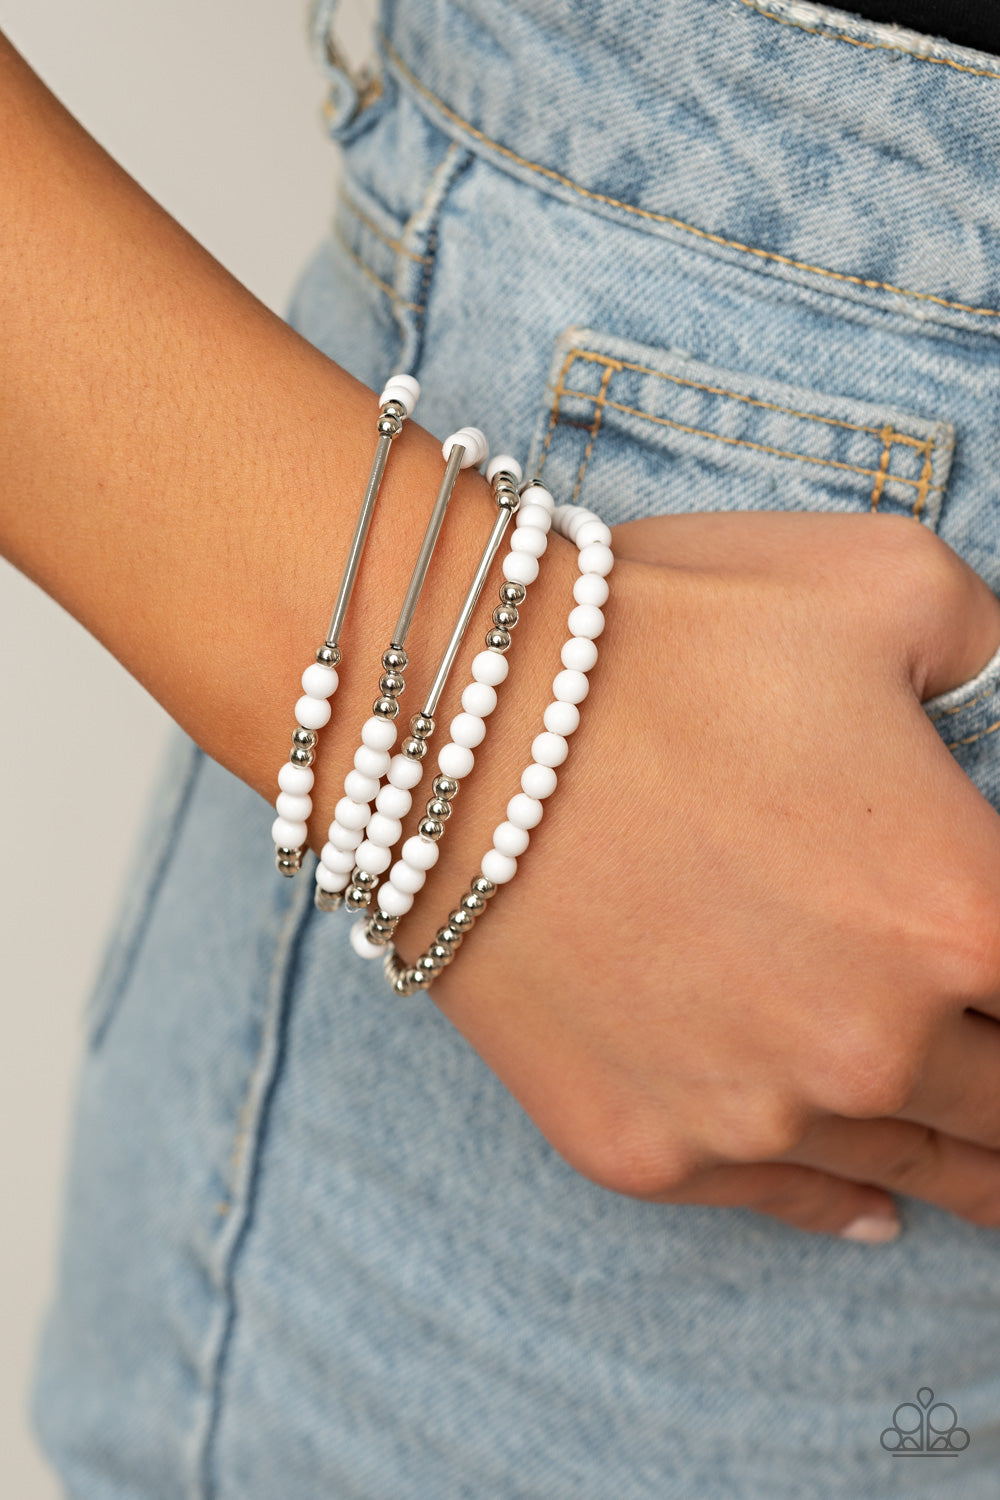 Paparazzi BEAD Between The Lines White Stretch Bracelet